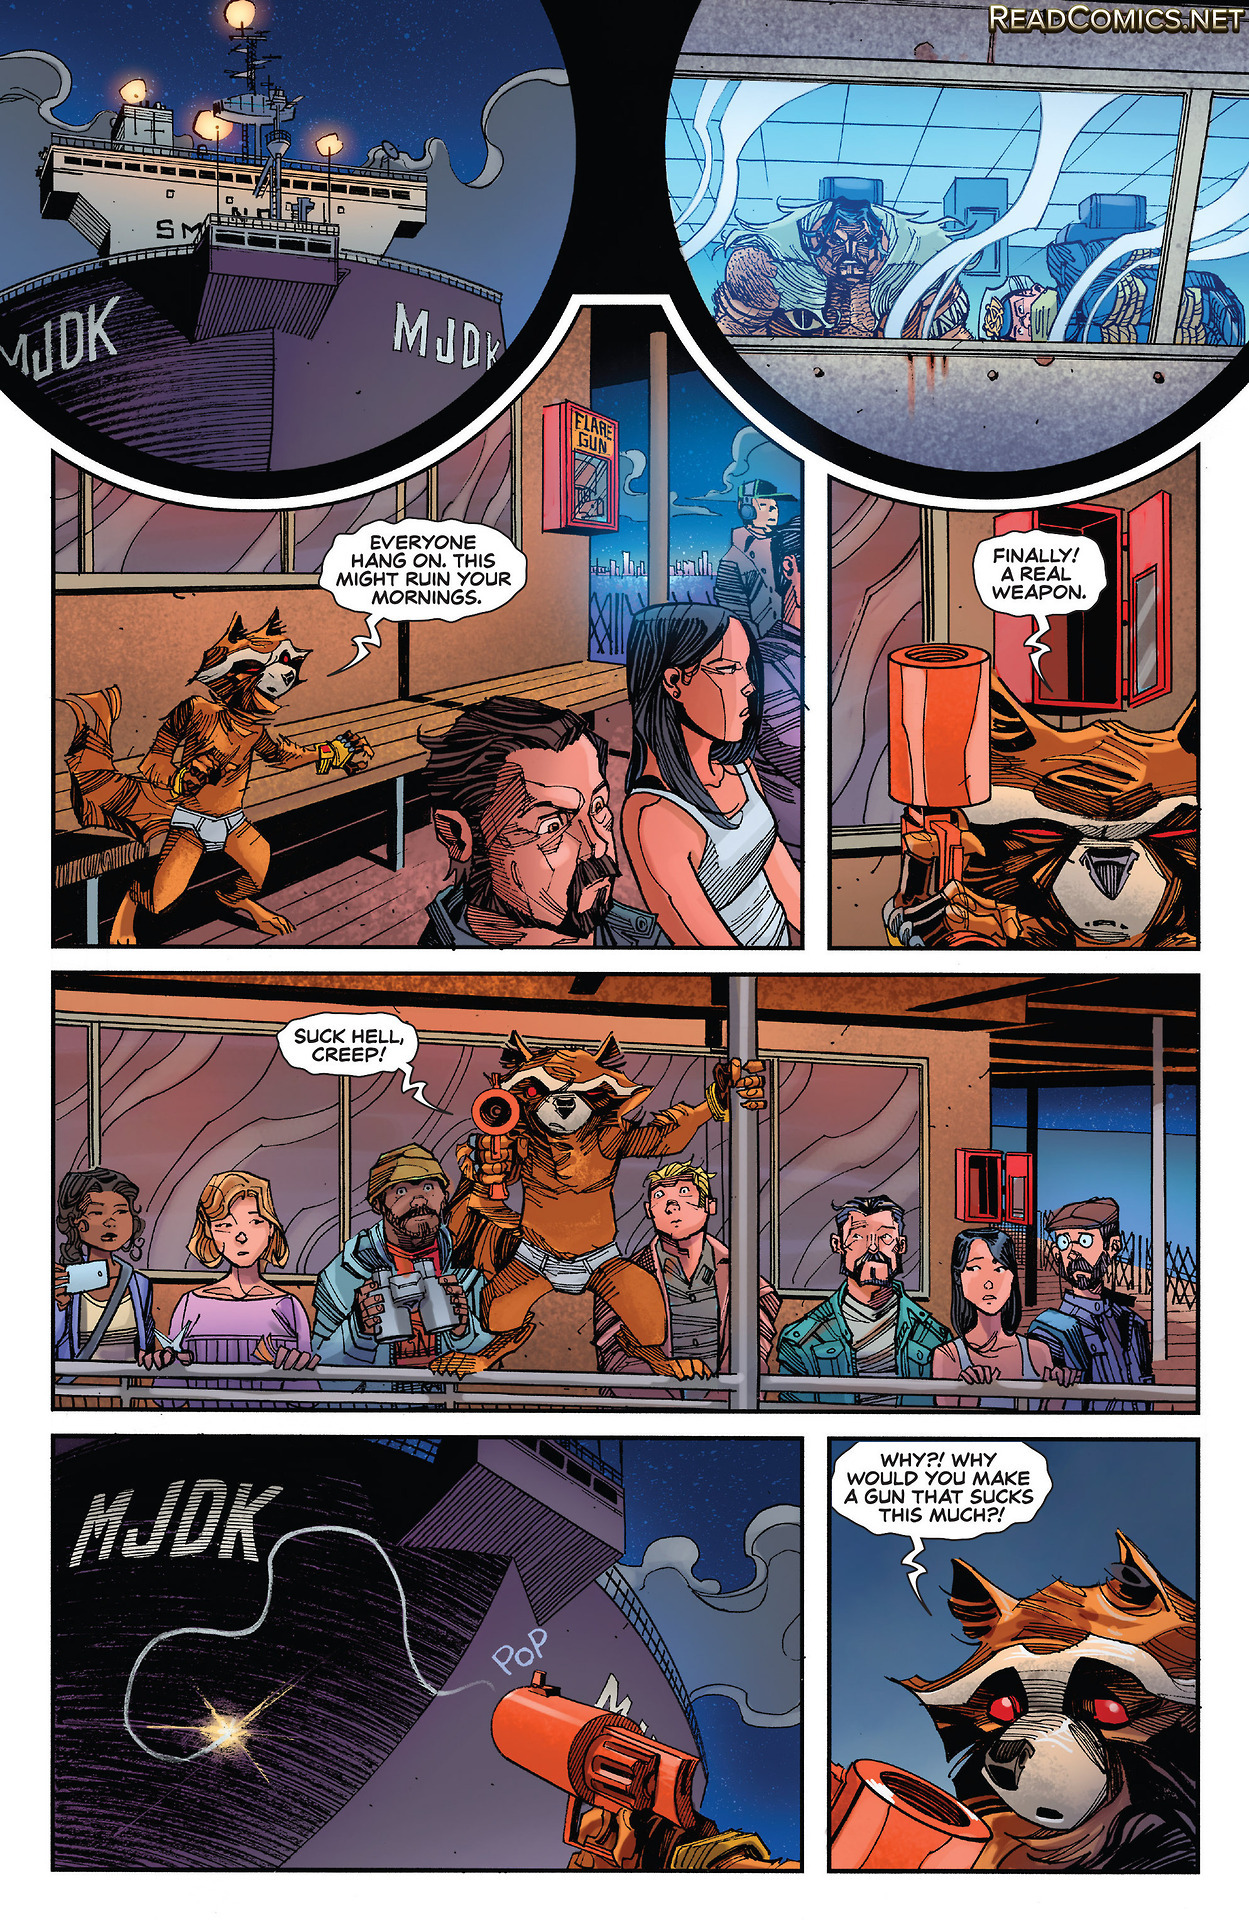 OH MY GOSHIn the latest issue of Rocket Raccoon (2016) (issue #3), we finally get